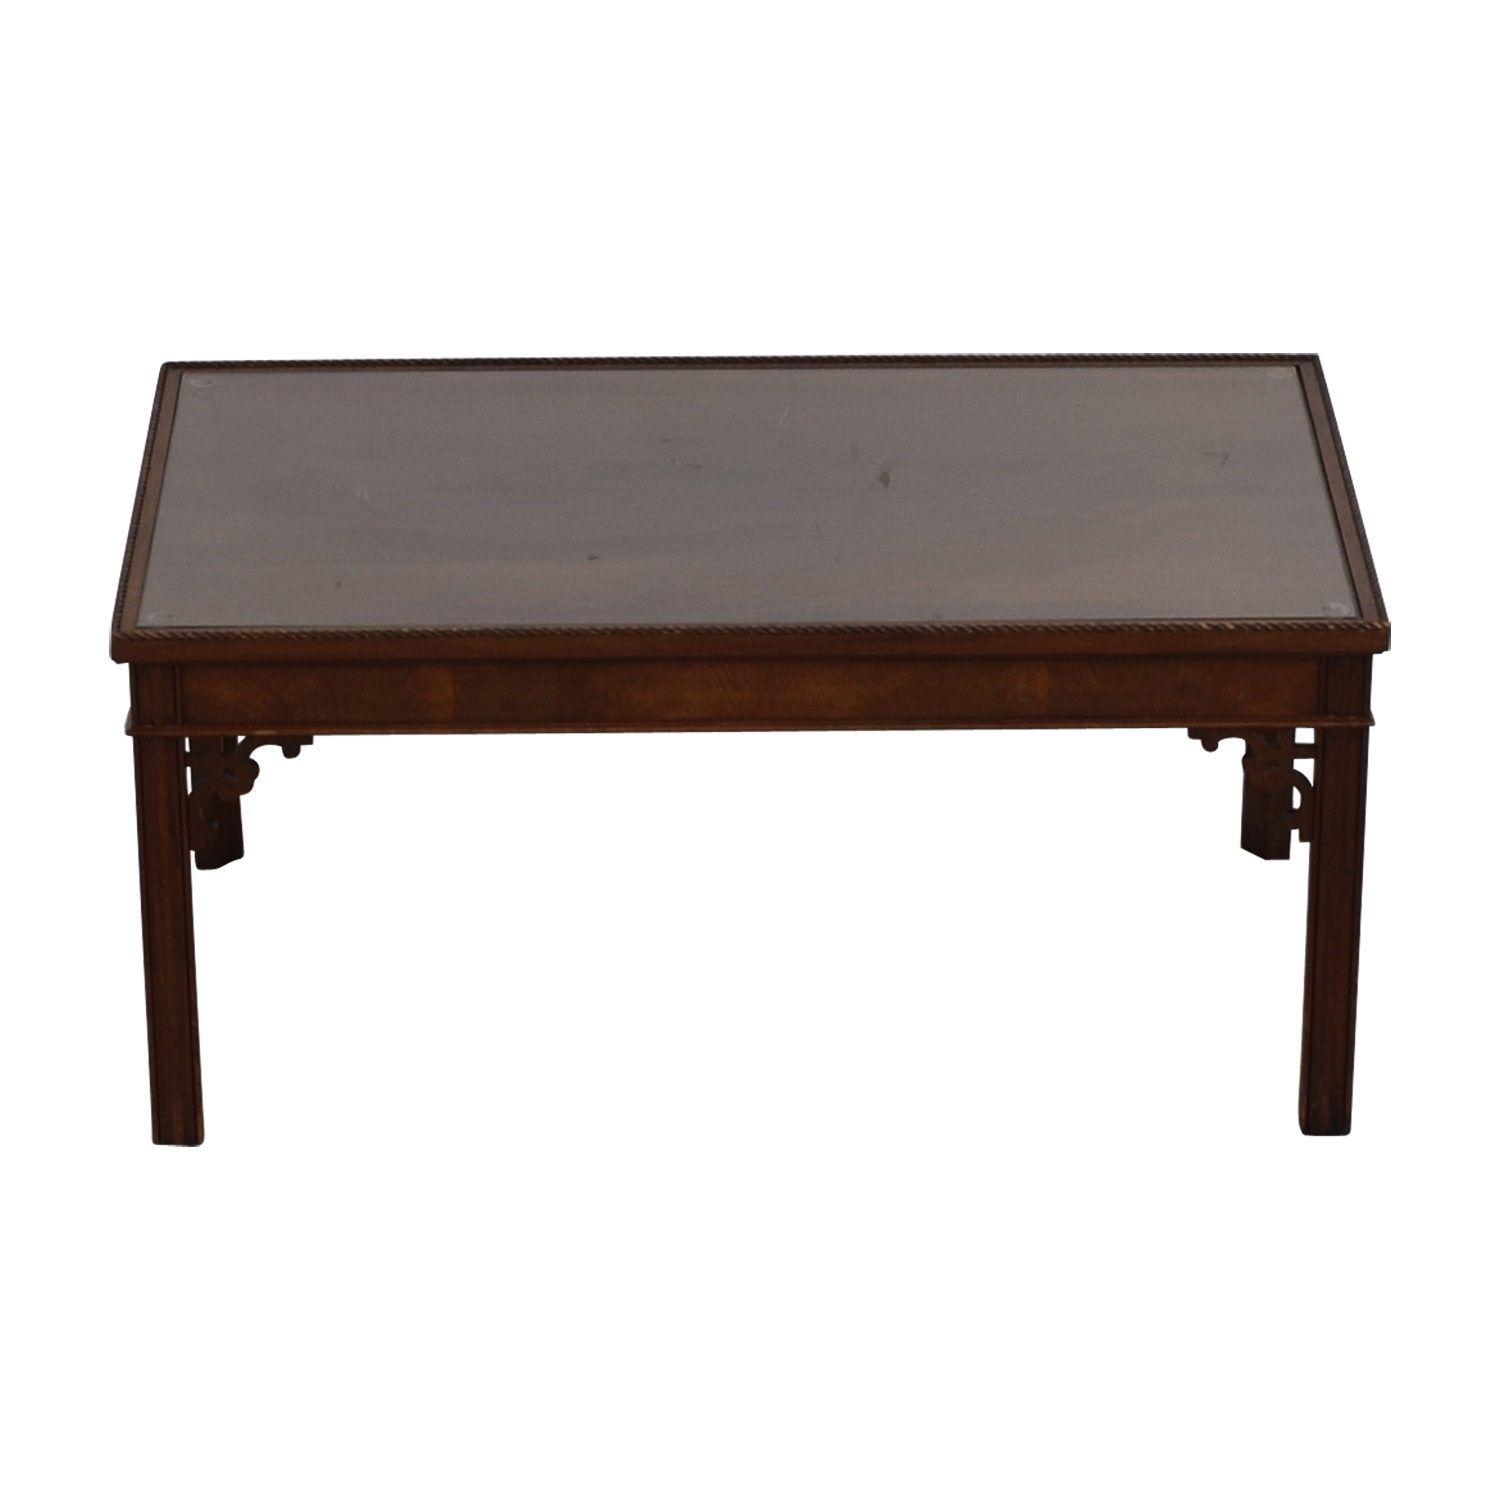 outdoor side table clearance probably fantastic nice walnut coffee tables used for with glass inset and end set setting ethan allen bookshelf wood small round dining heavy duty